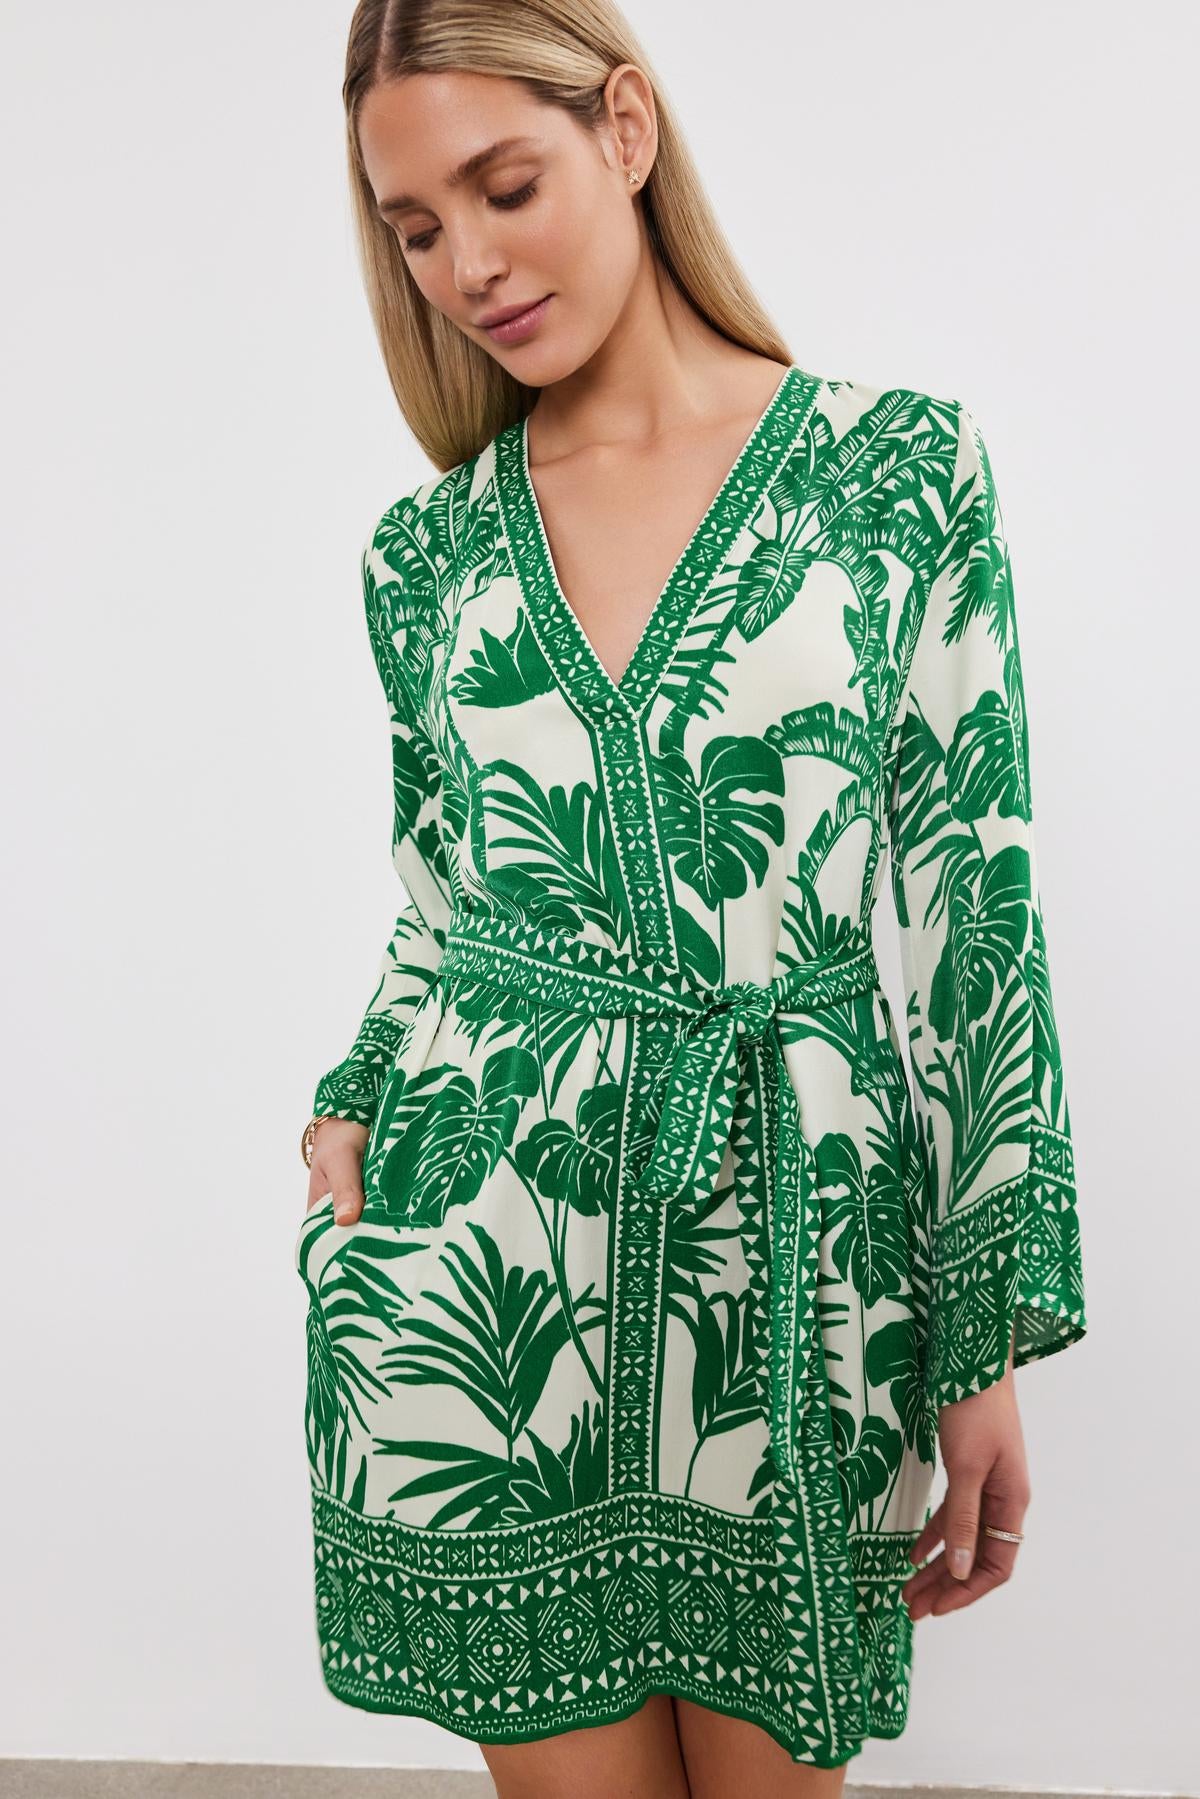 Woman wearing a Velvet by Graham & Spencer EMELLA DRESS, a green and white palm print dress with a v-neckline and detachable belt, posing in a studio setting.-36917044052161